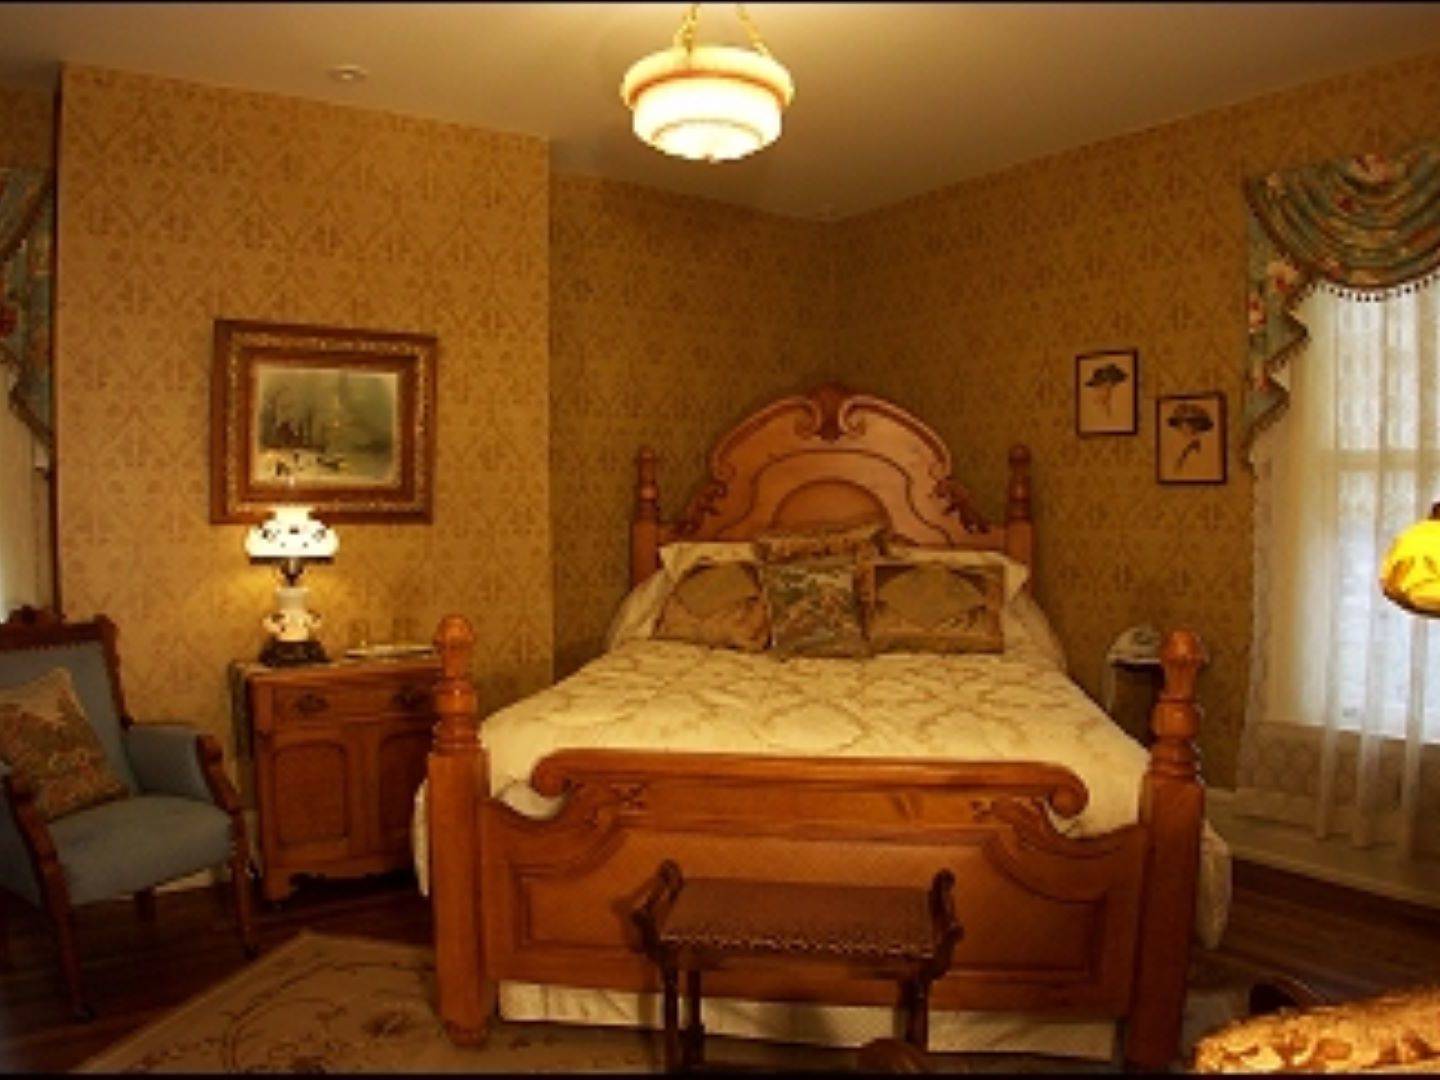 Traverse City Bed and Breakfast